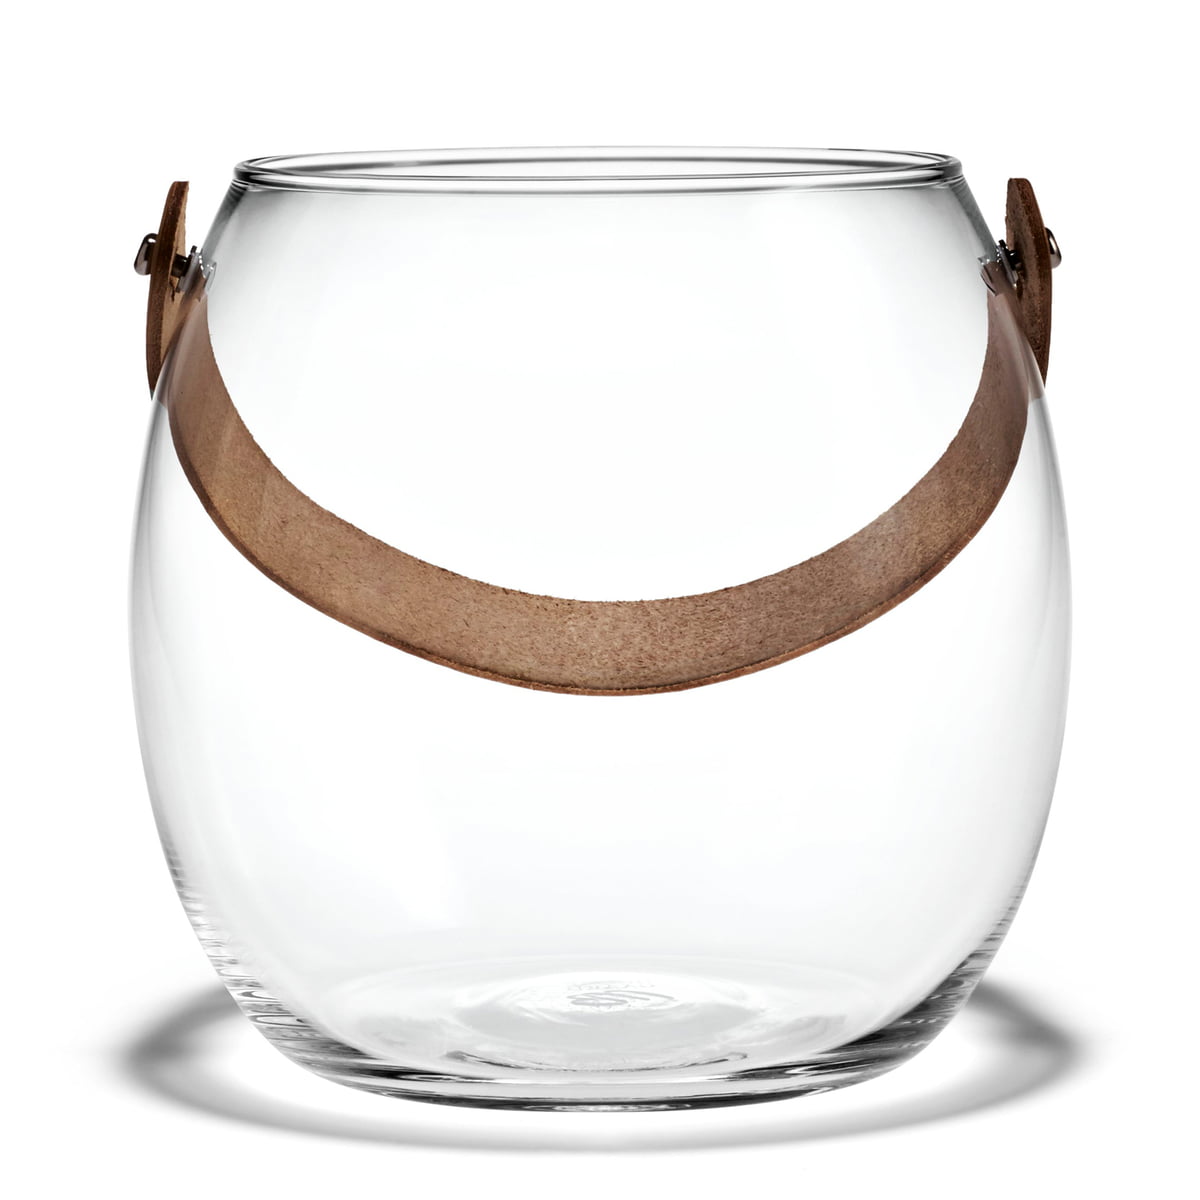 Design with Light glass bowl by Holmegaard